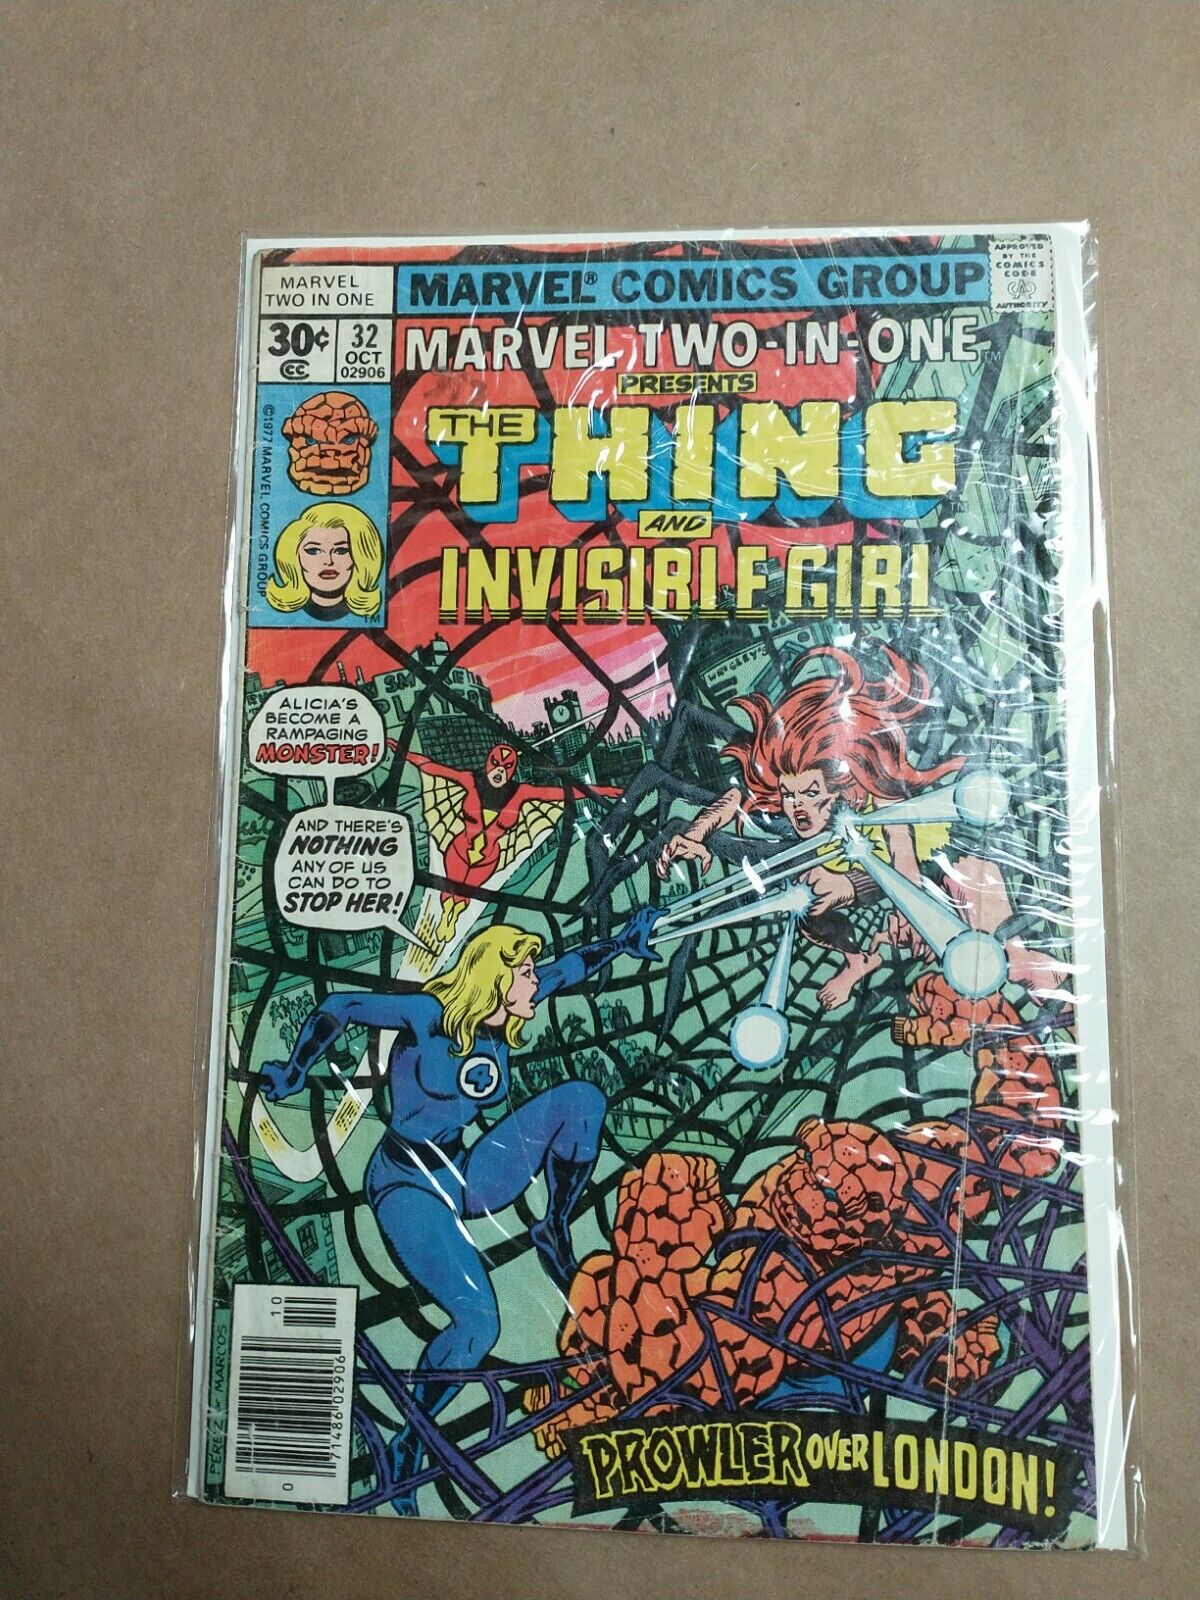 MARVEL TWO-IN-ONE #32 The Thing & Invisible Girl Marvel Comics